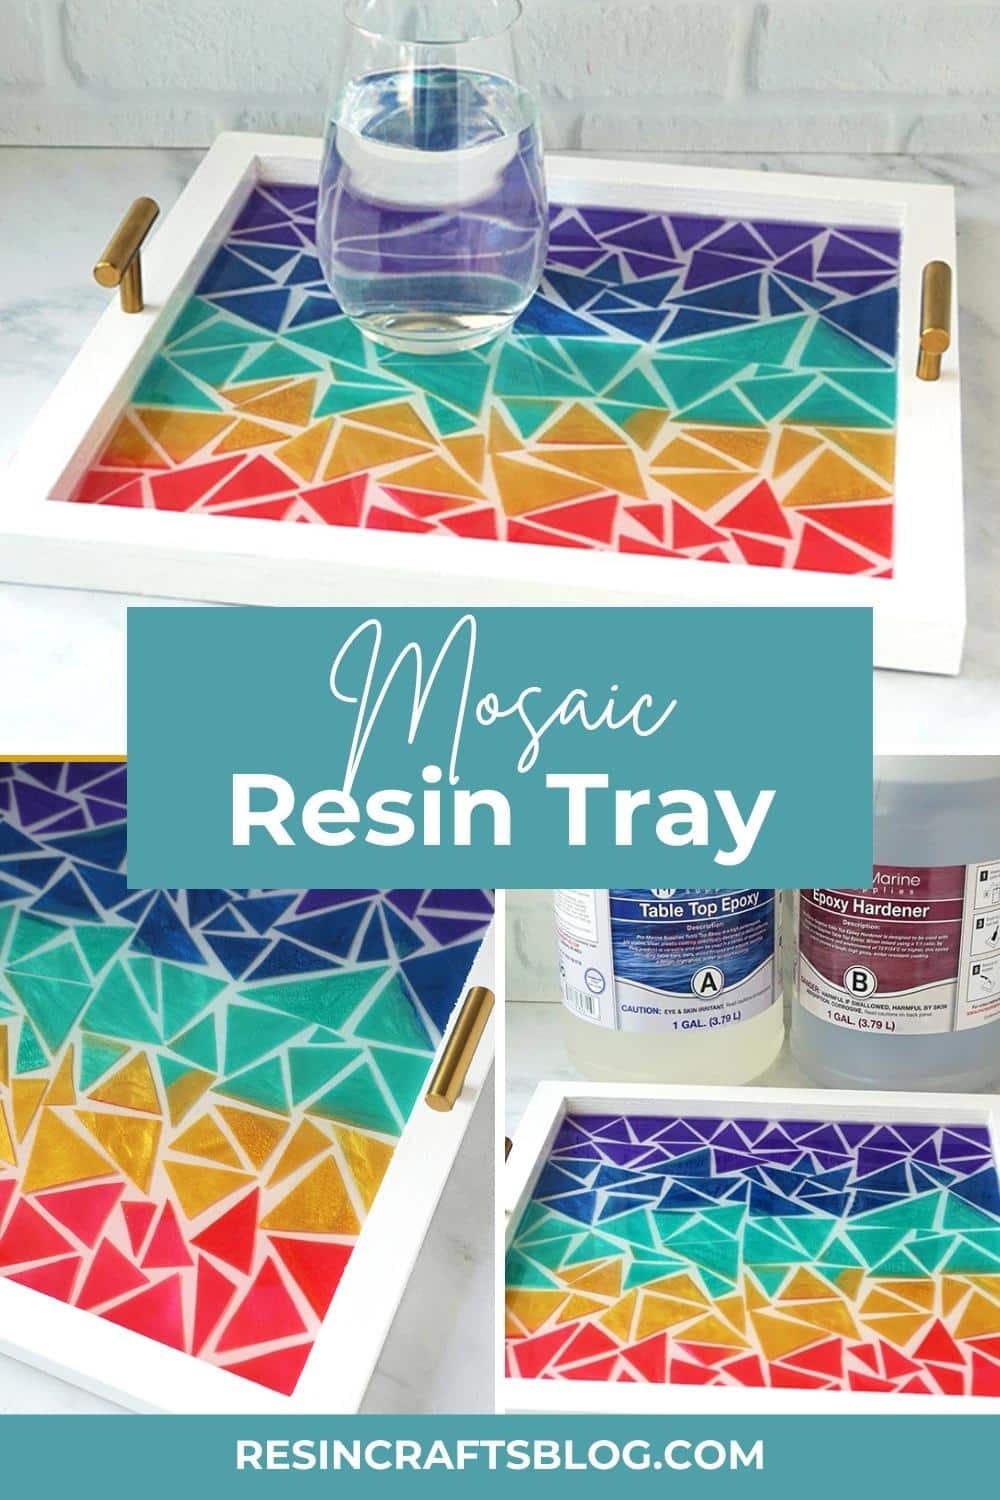 How to make a mosaic resin tray with leftover resin pieces. via @resincraftsblog